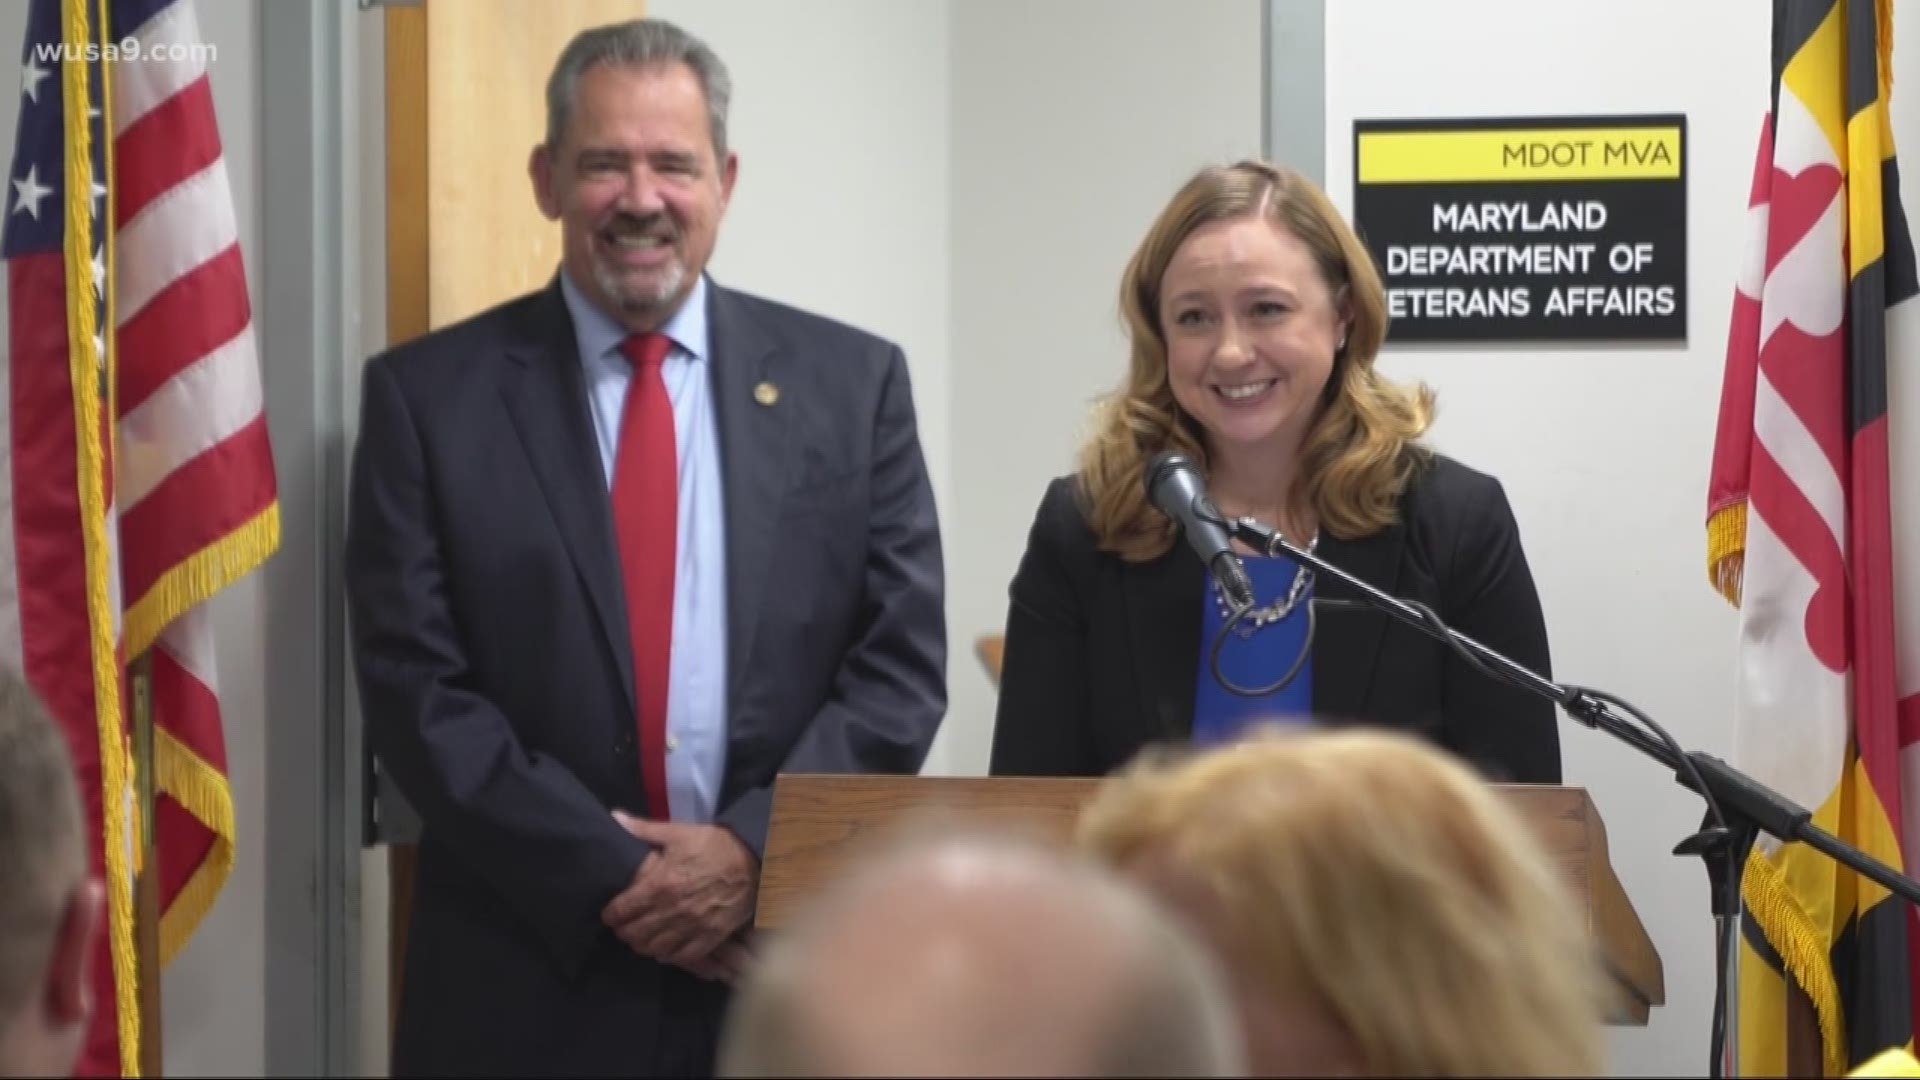 Madelaine Waltjen Shedlick's story reached the highest levels of MD government. State leaders found what happened so impactful, they pre-filed a bill in response.